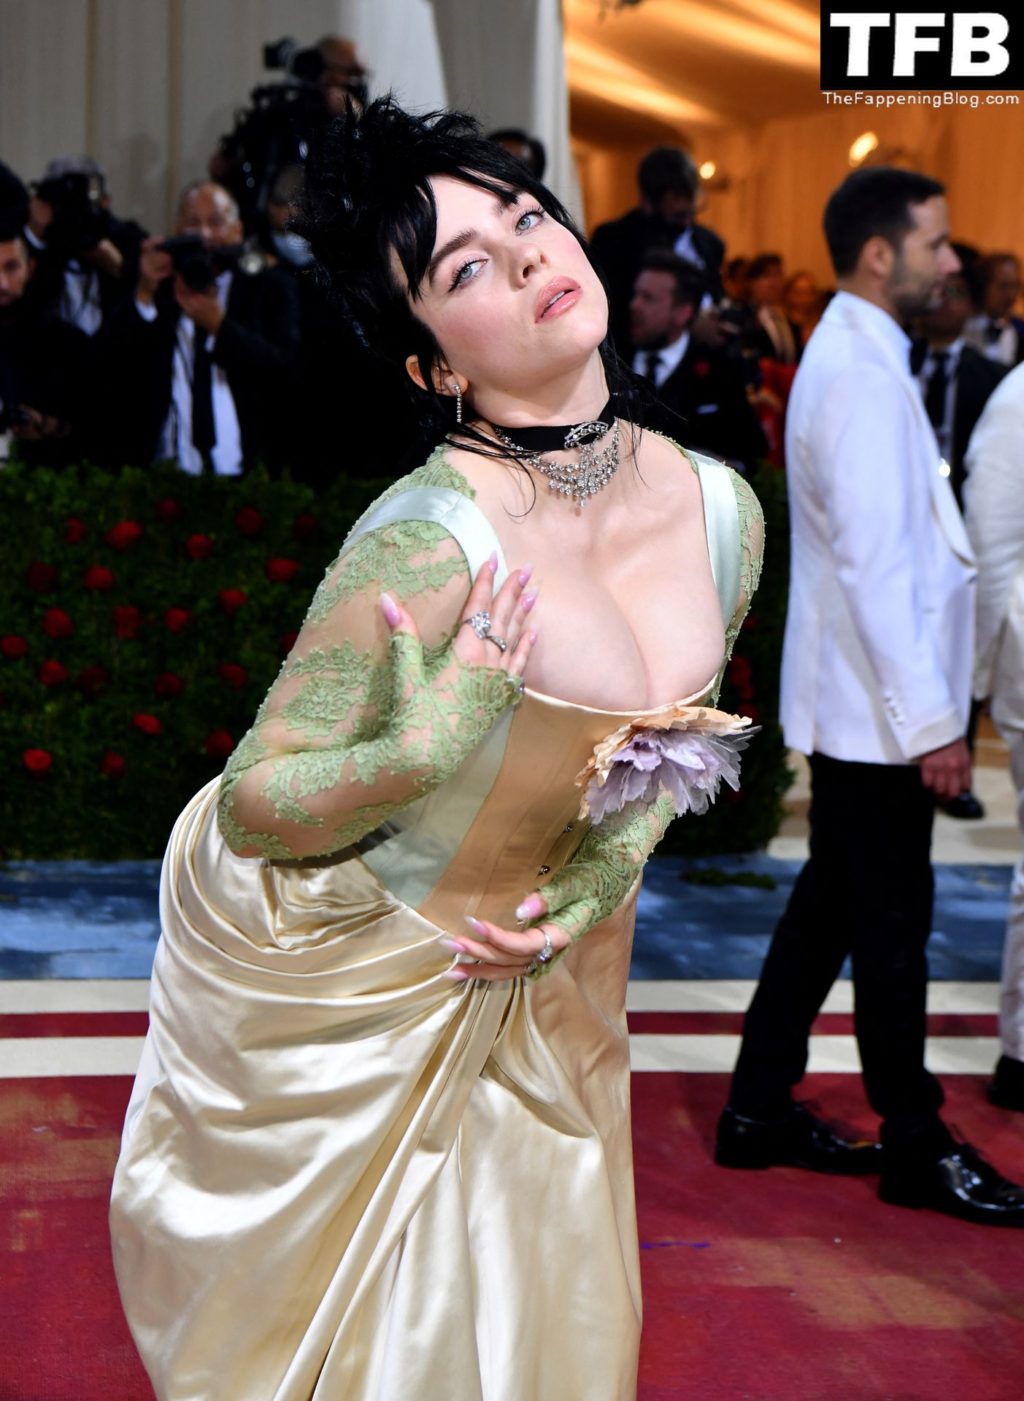 Billie Eilish Sexy The Fappening Blog 1 1024x1401 - Billie Eilish Showcases Nice Cleavage at The 2022 Met Gala in NYC (155 Photos)